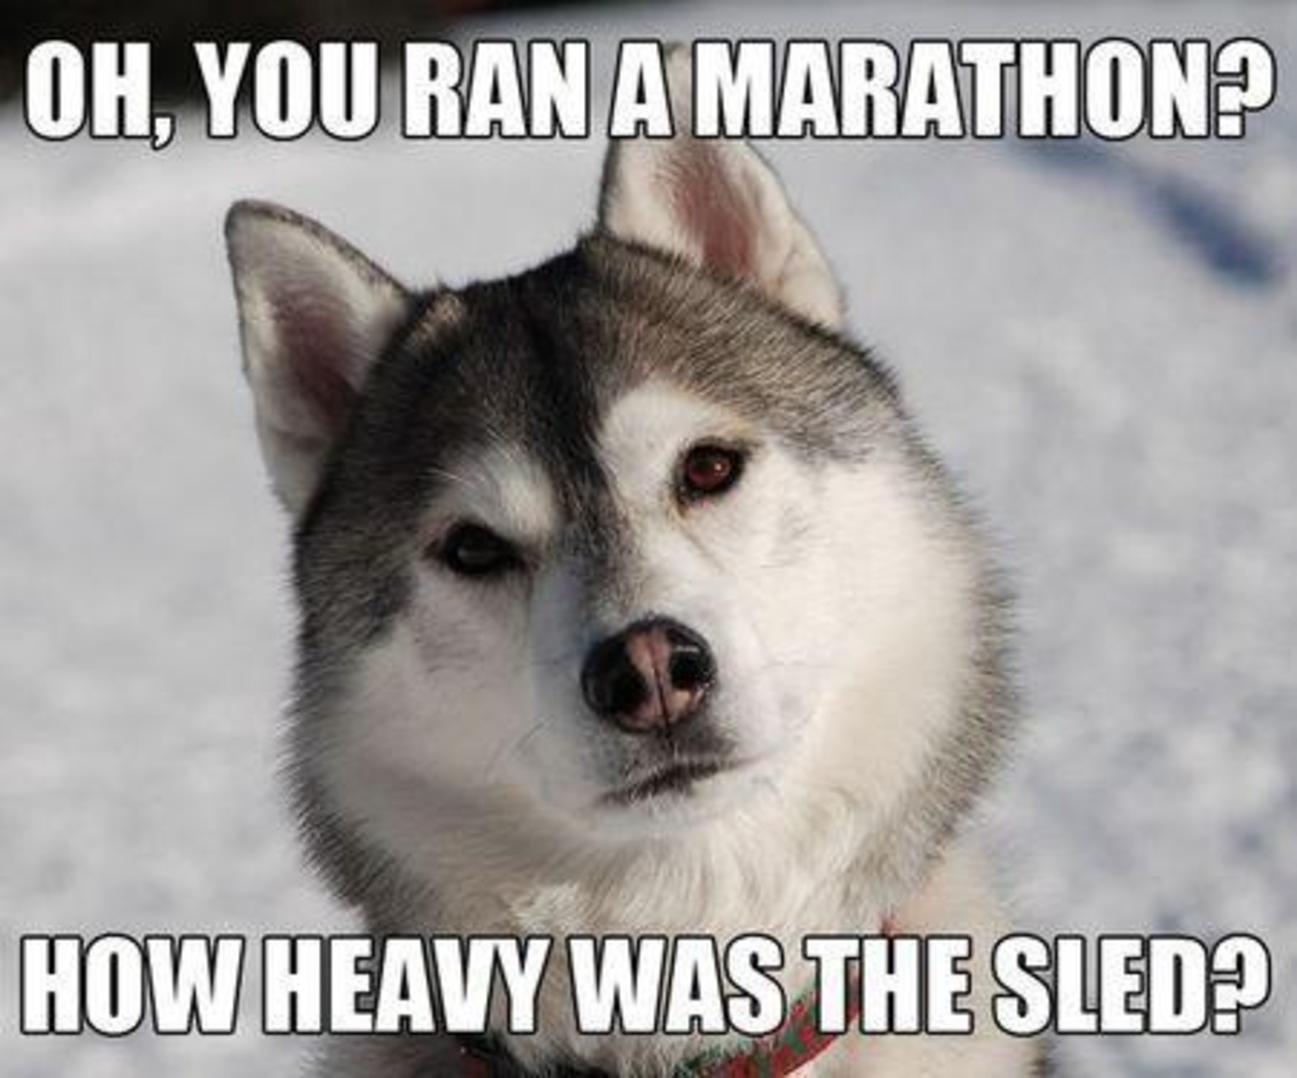 Siberian sled dogs are the fittest animals in the world